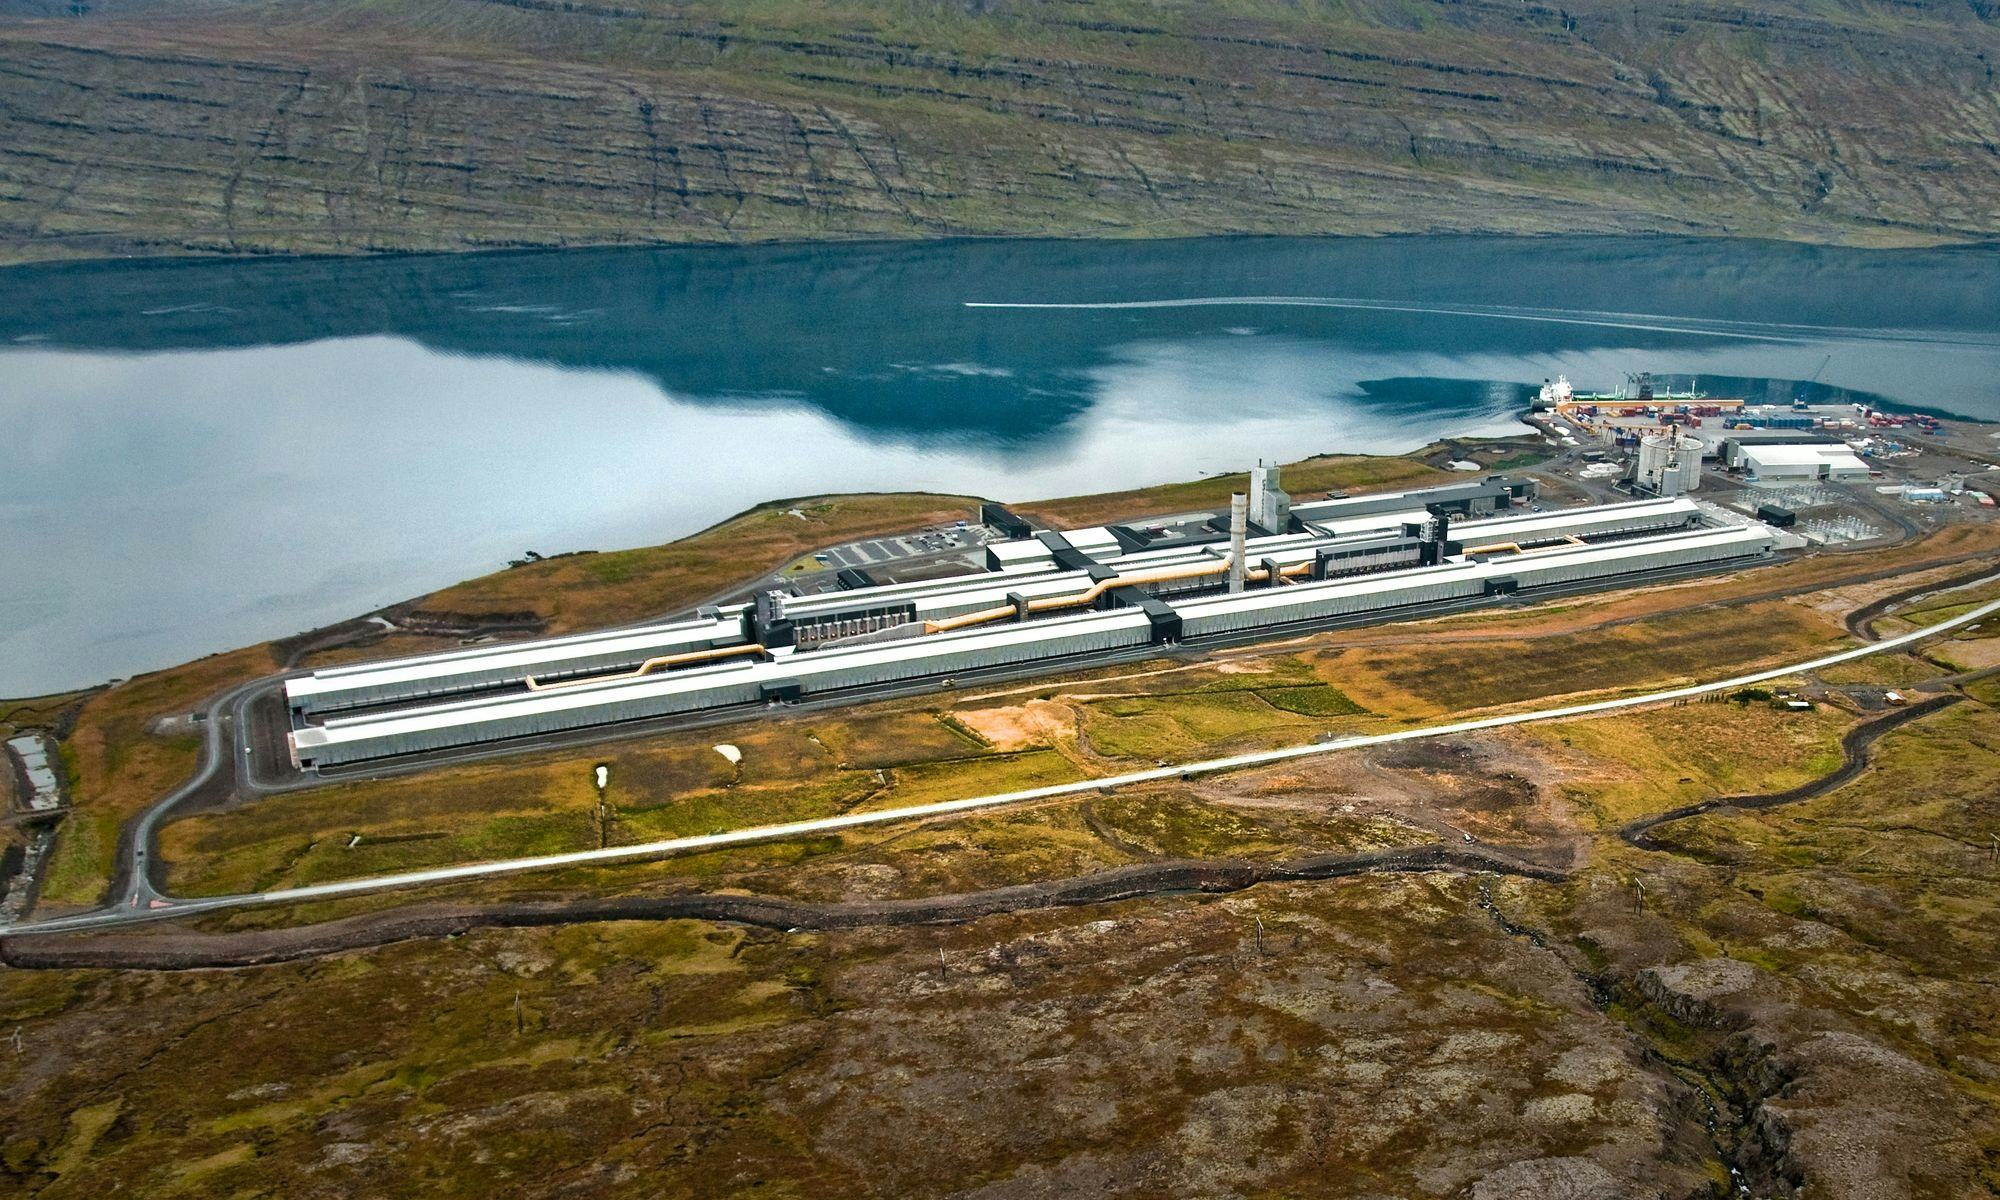 An aluminum plant in a fjord seen from above, blue sea and mountain slopes